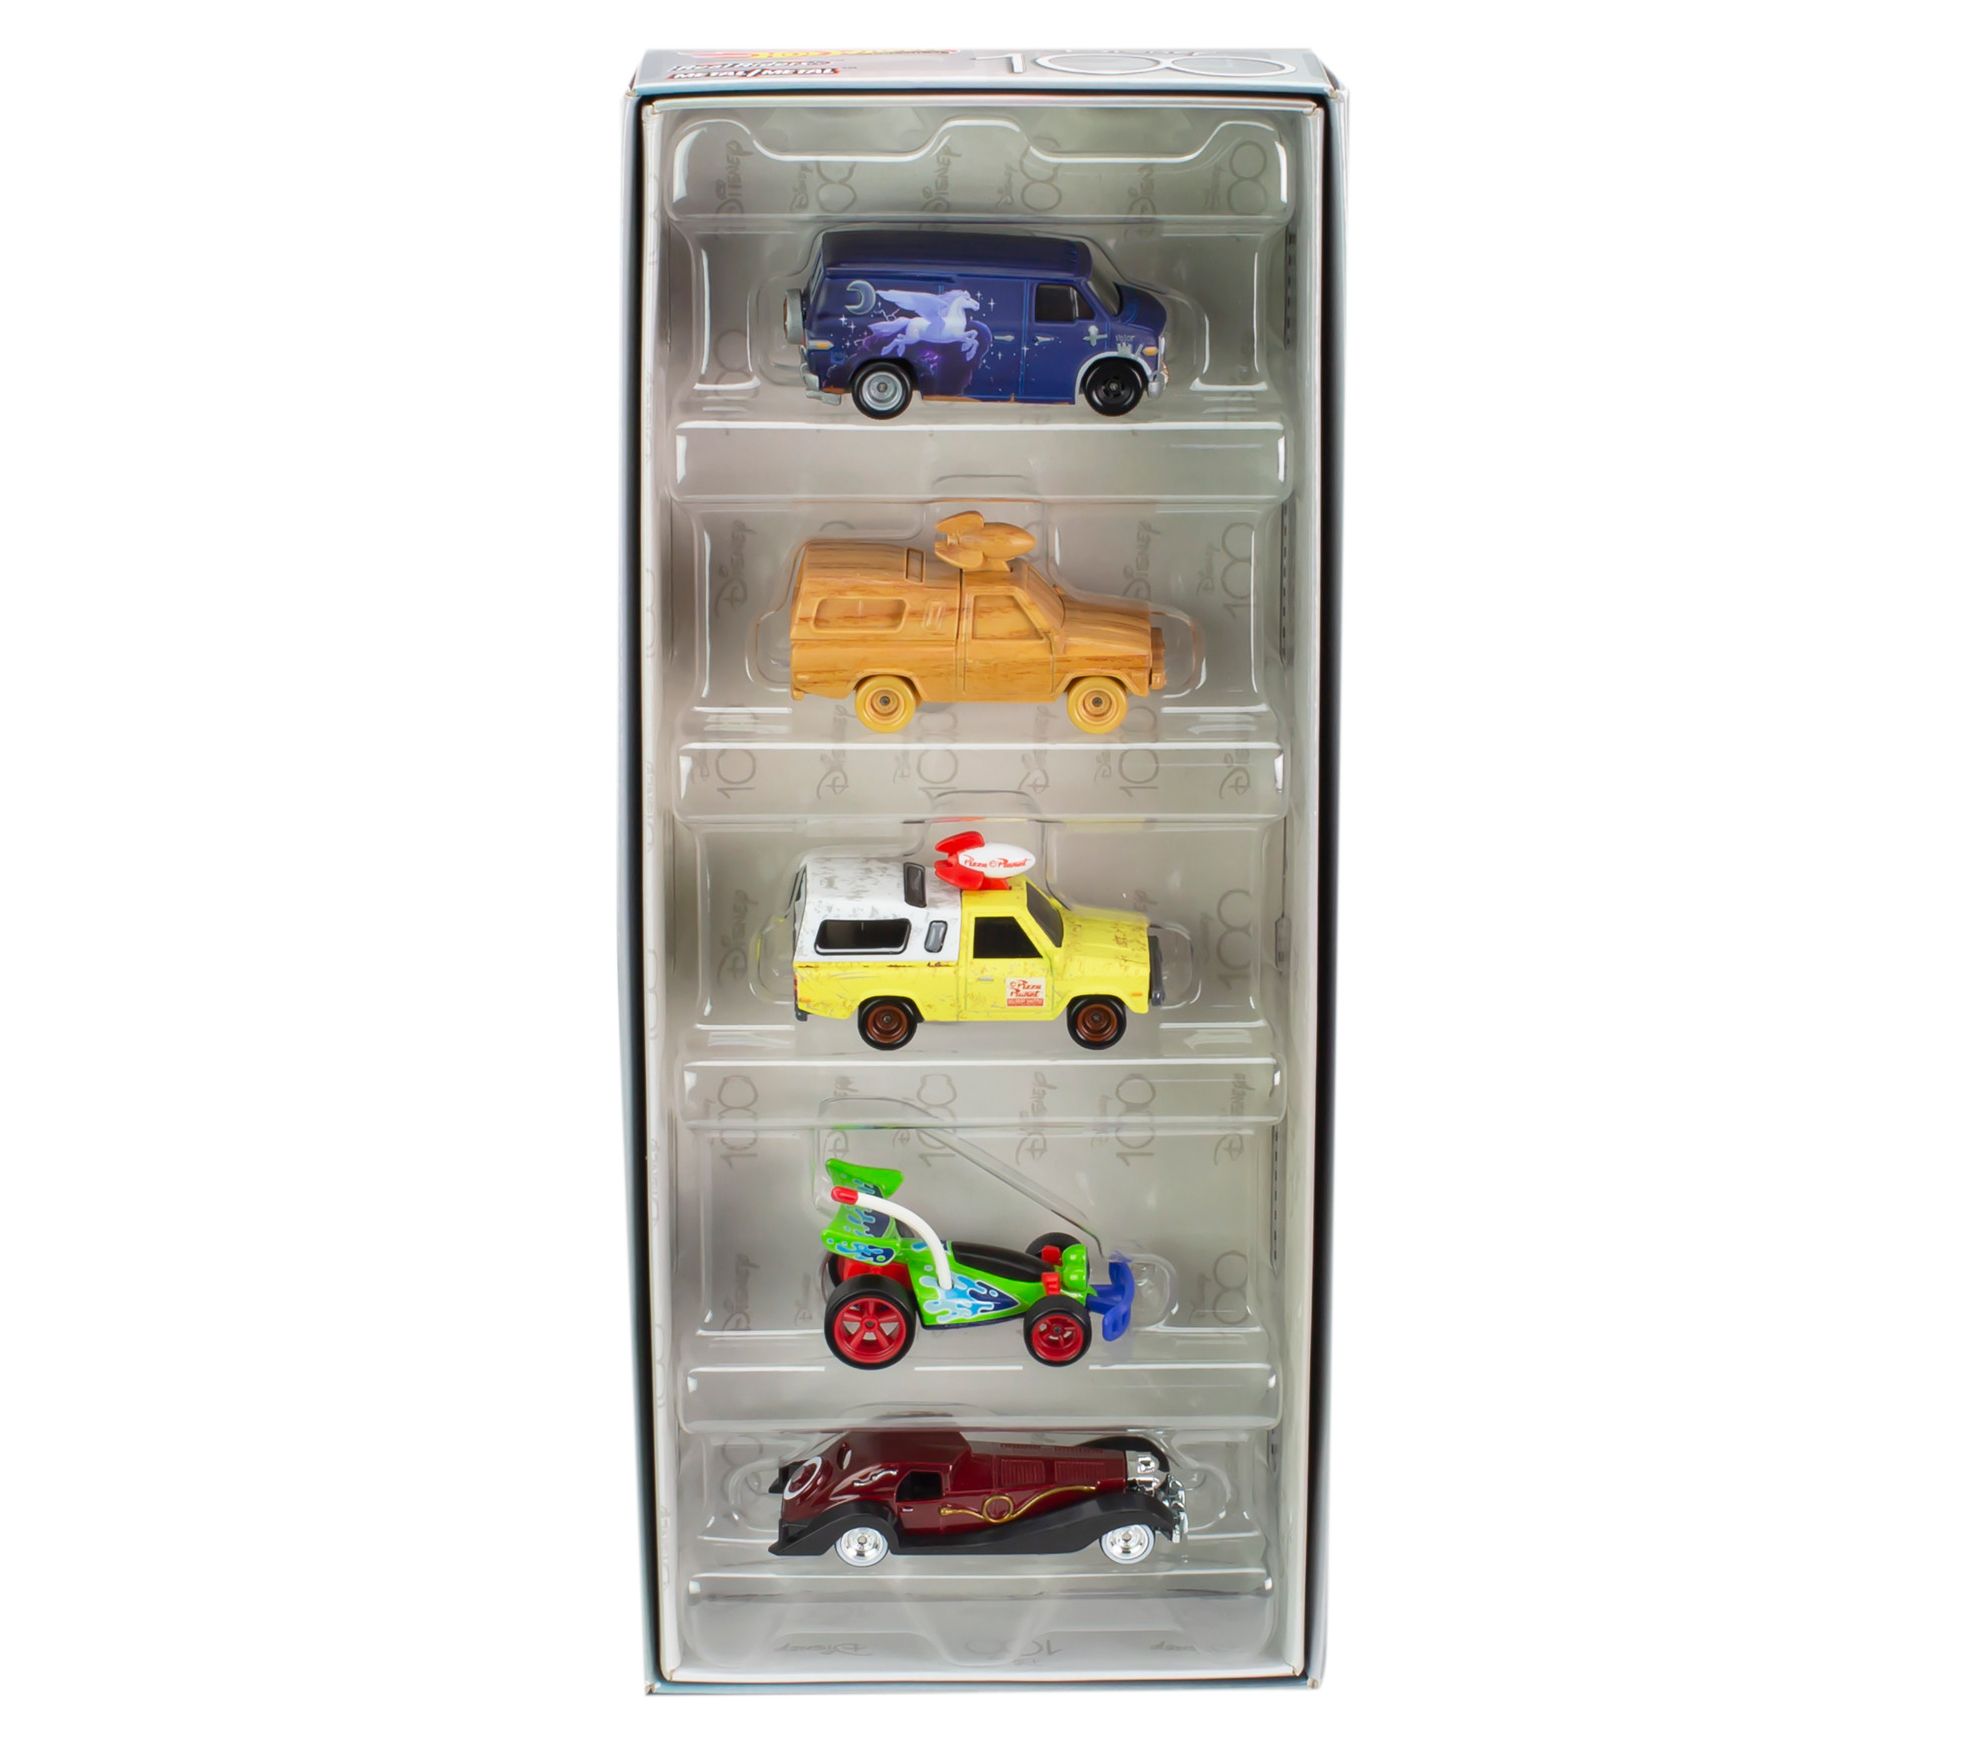 Hot Wheels Character Cars Mix 4 Case of 8